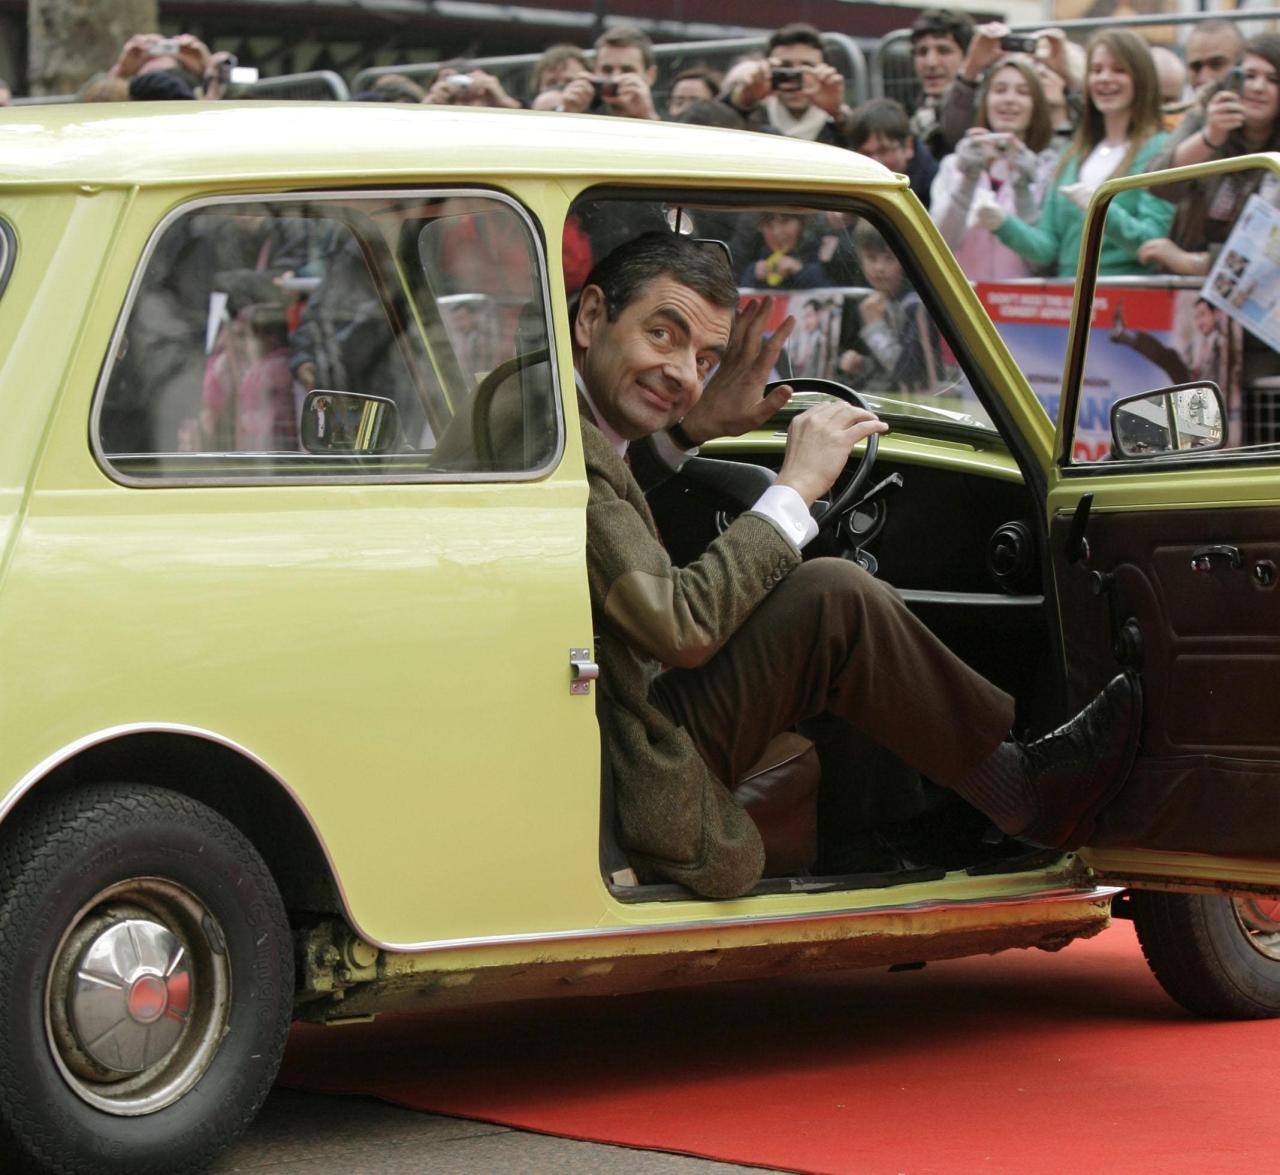 lamtac discover mr bean s iconic million classic mini that has been associated with the childhoods of millions of people around the world 655cc319ebc07 Discover Mr. Bean's Iconic 1 Million Classic Mini 1000 That Has Been Associated With The Childhoods Of Millions Of People Around The World.